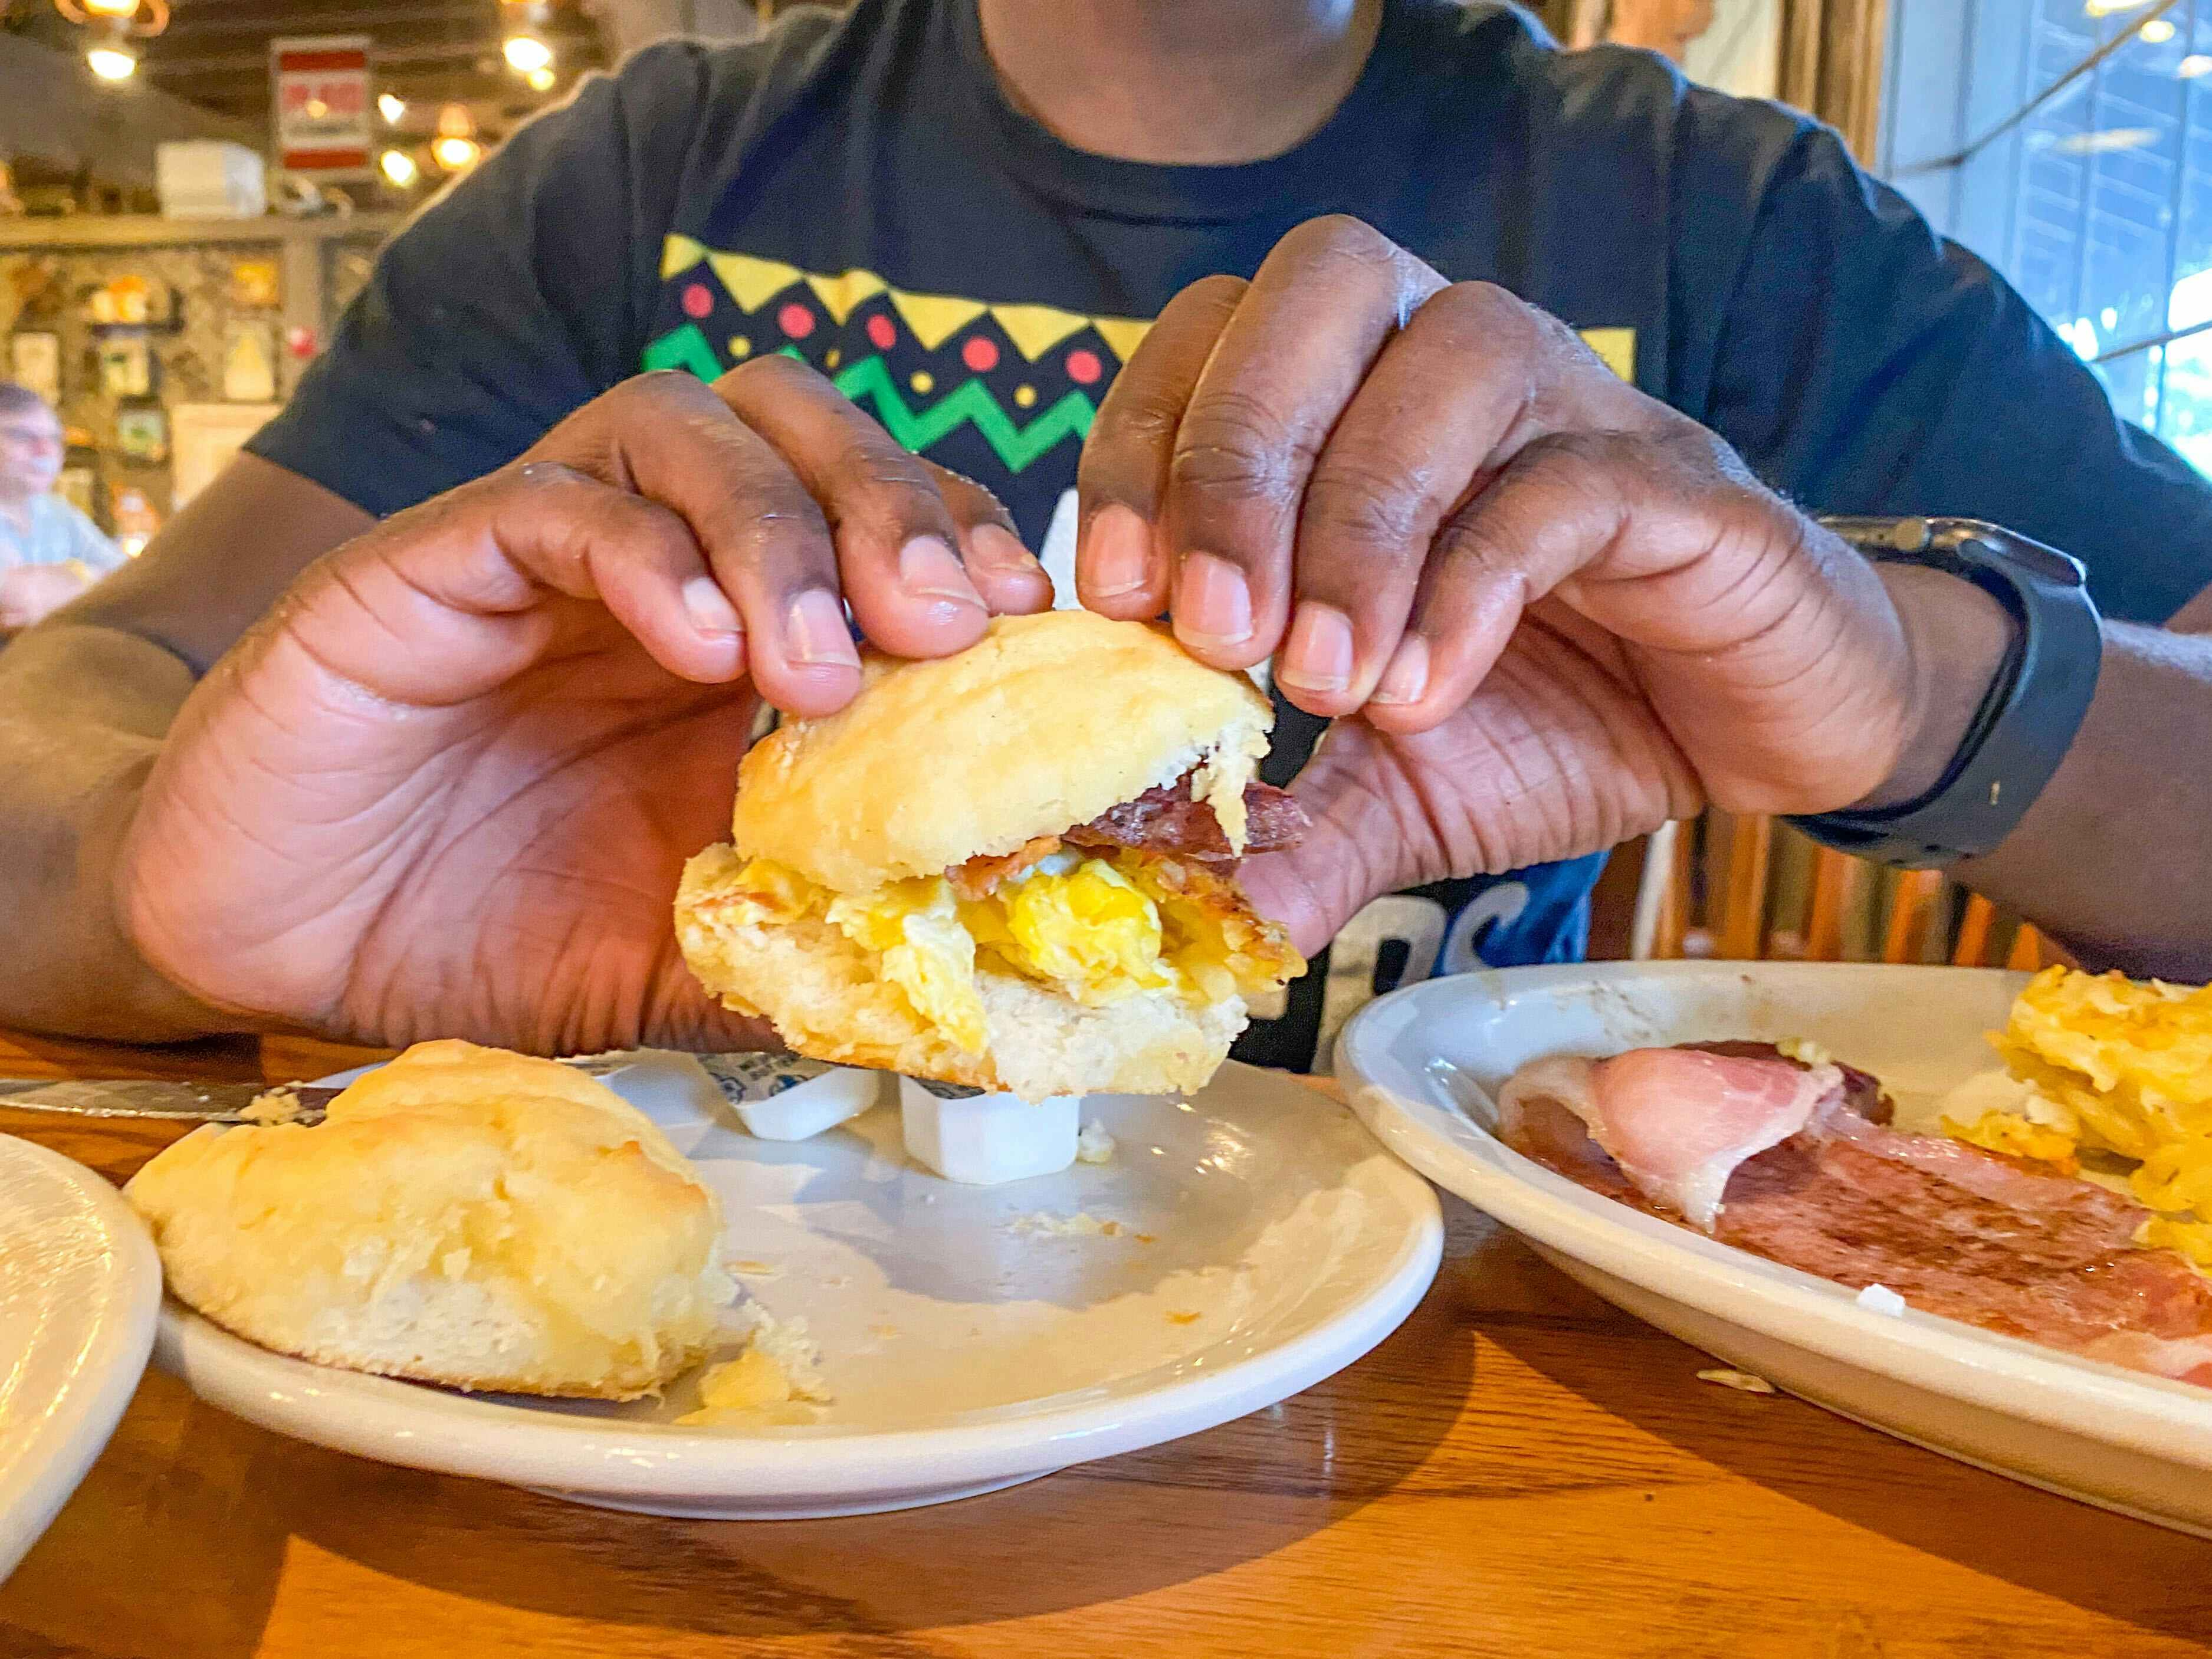 A person holding a breakfast sandwich above a plate on a table at Cracker Barrel.